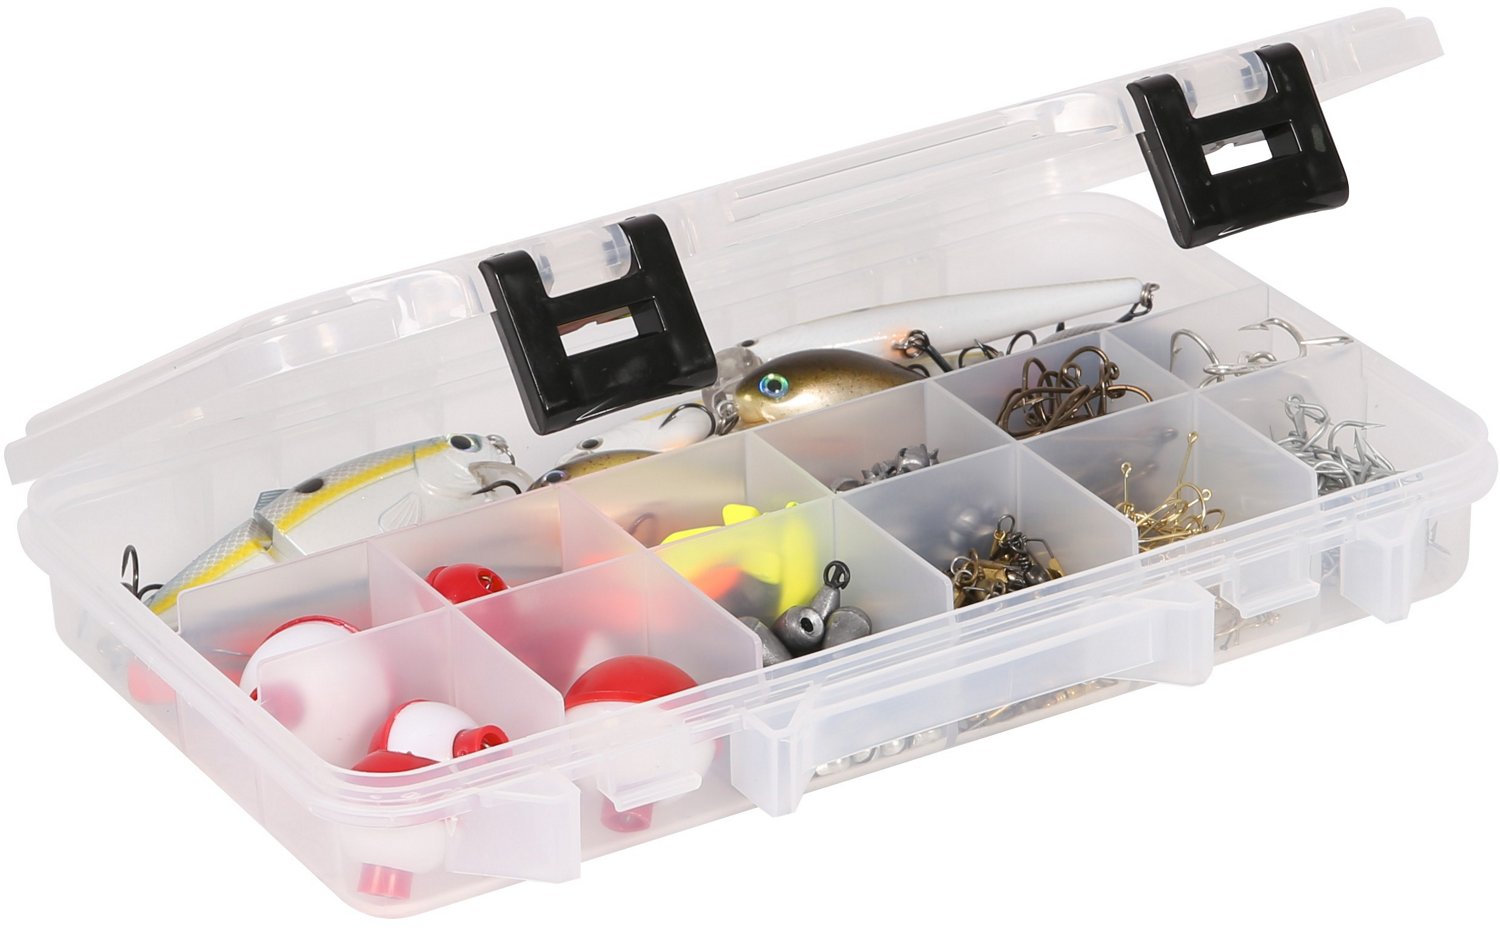 Plano 3600 ProLatch 13-Compartment StowAway Tackle Box | Academy